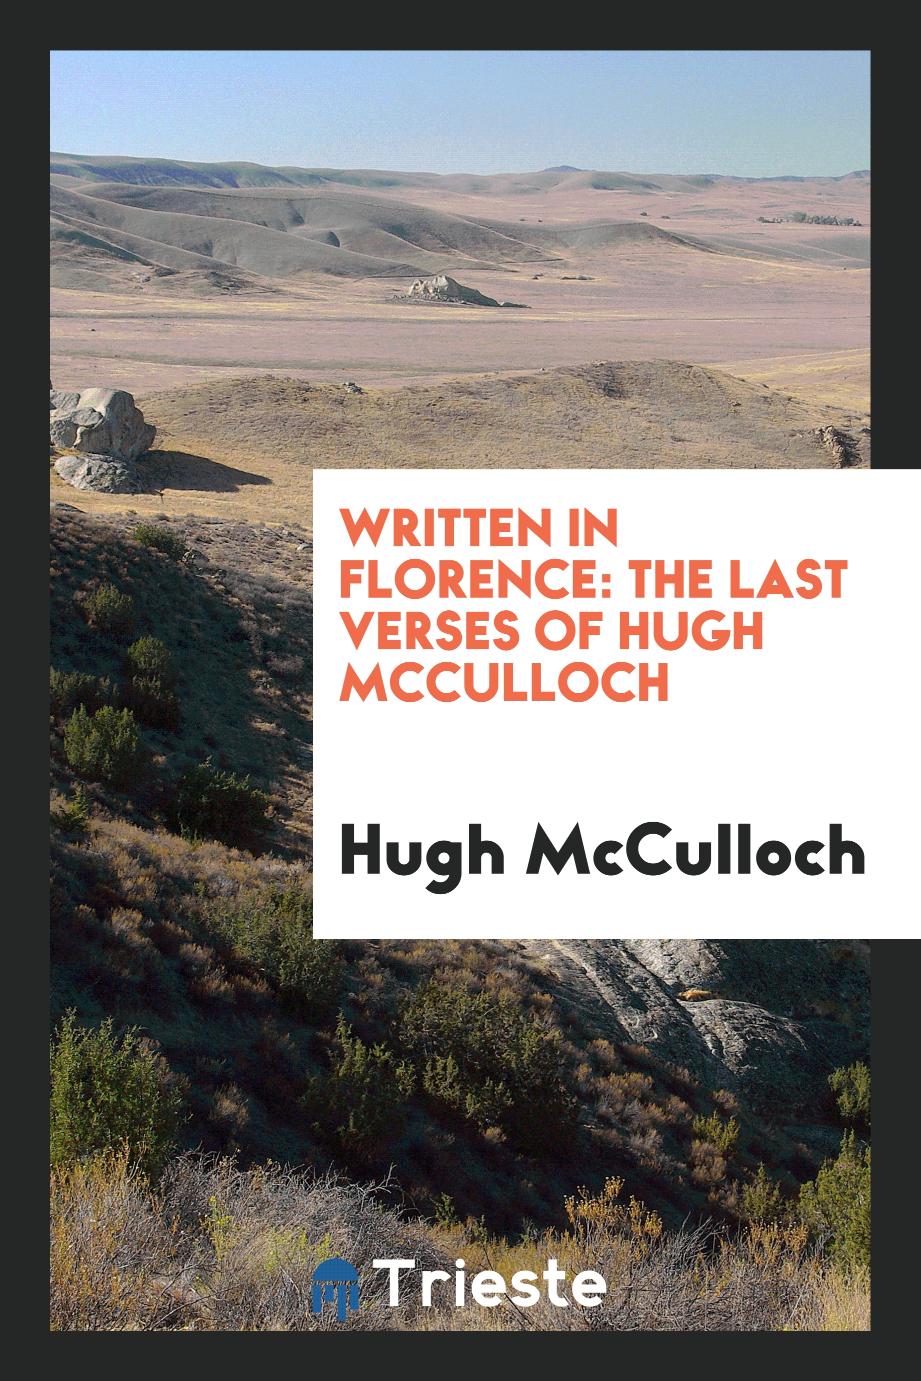 Written in Florence: The Last Verses of Hugh McCulloch